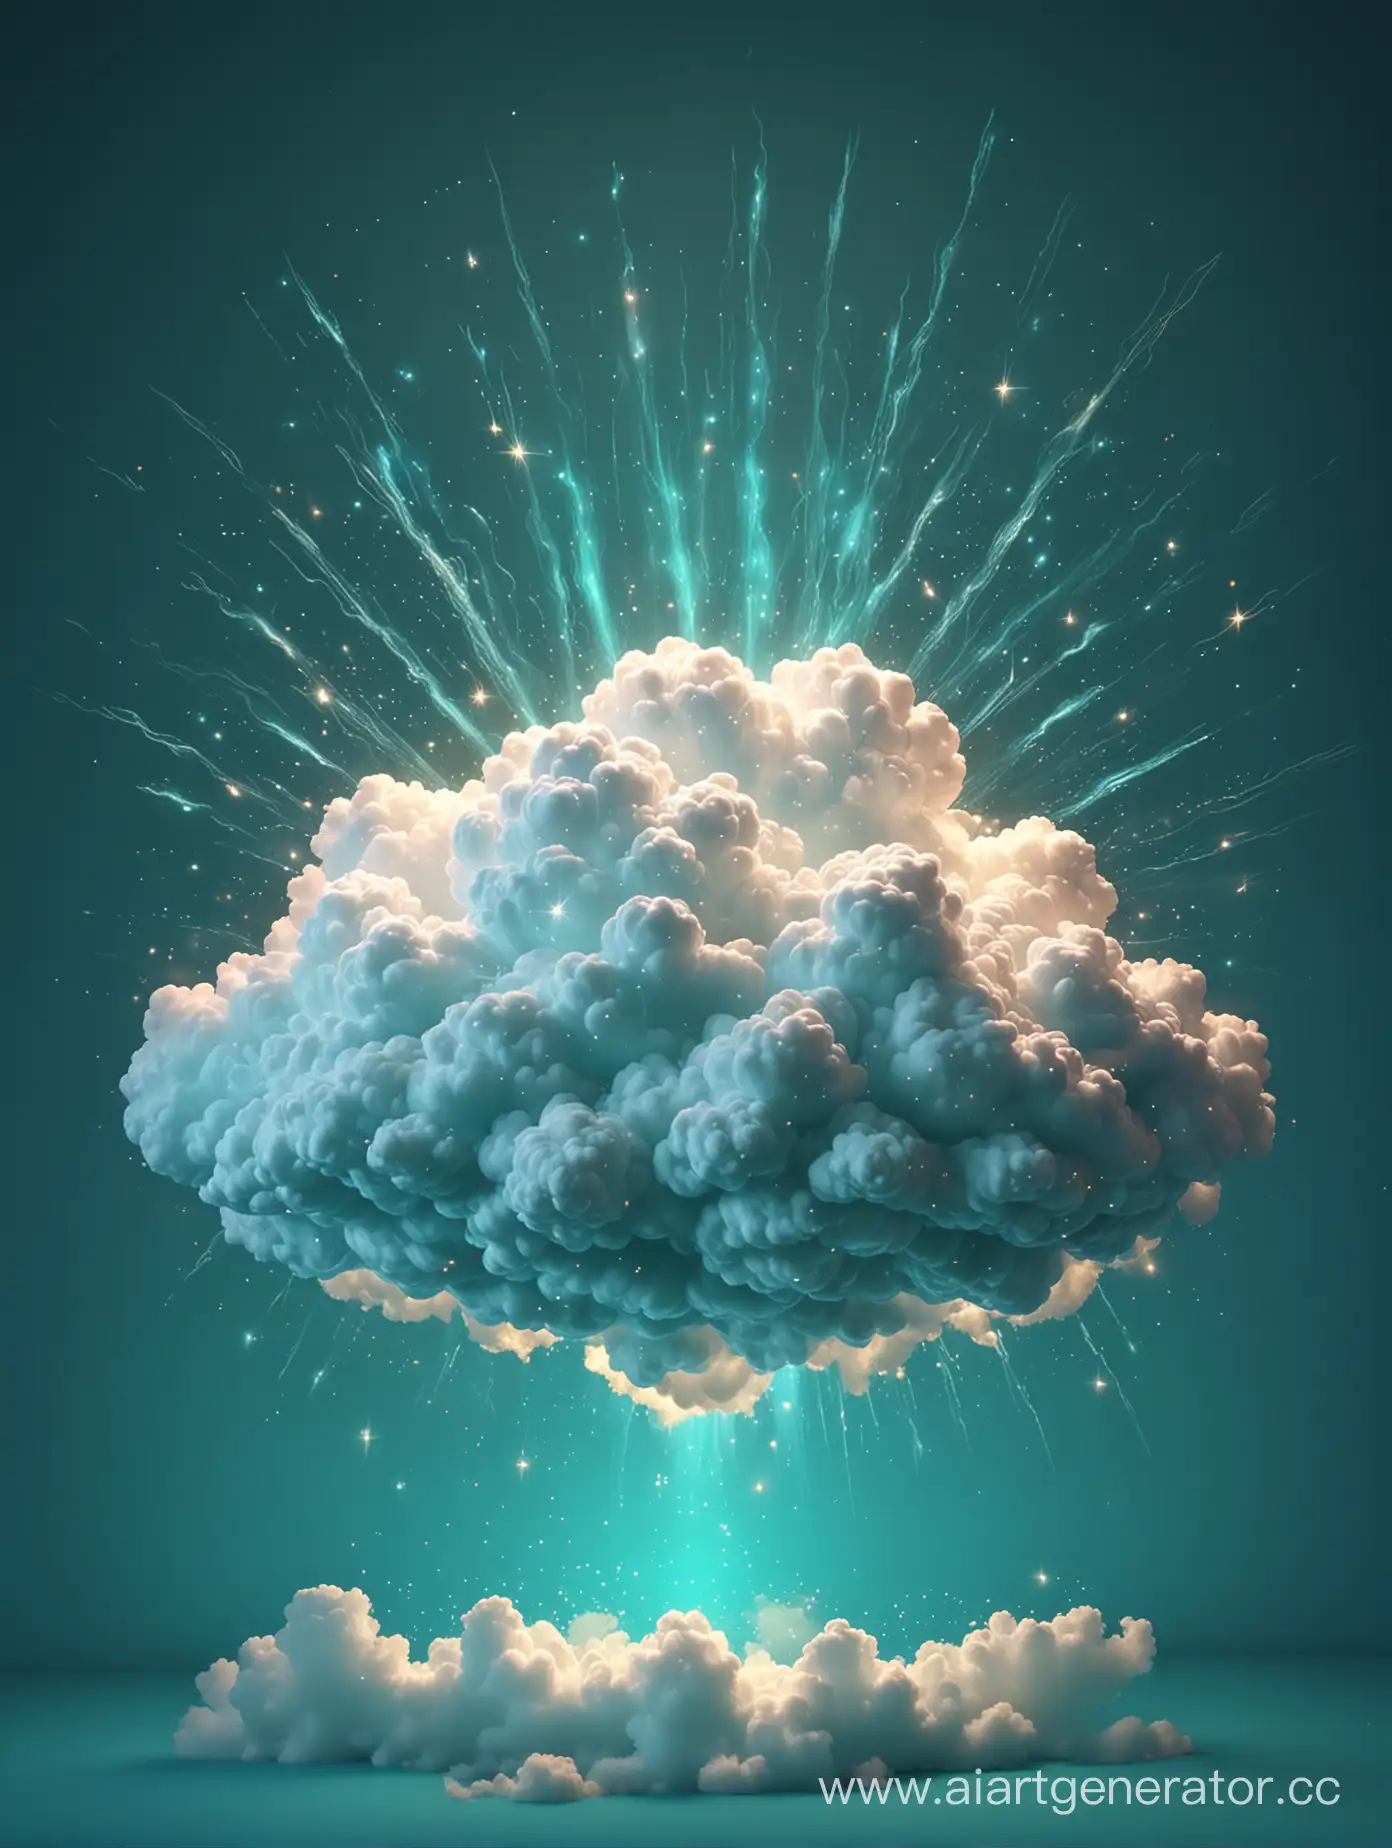 Enchanting-3D-Cloud-Illuminated-in-Turquoise-Blue-with-Magical-Sparkles-and-Stars